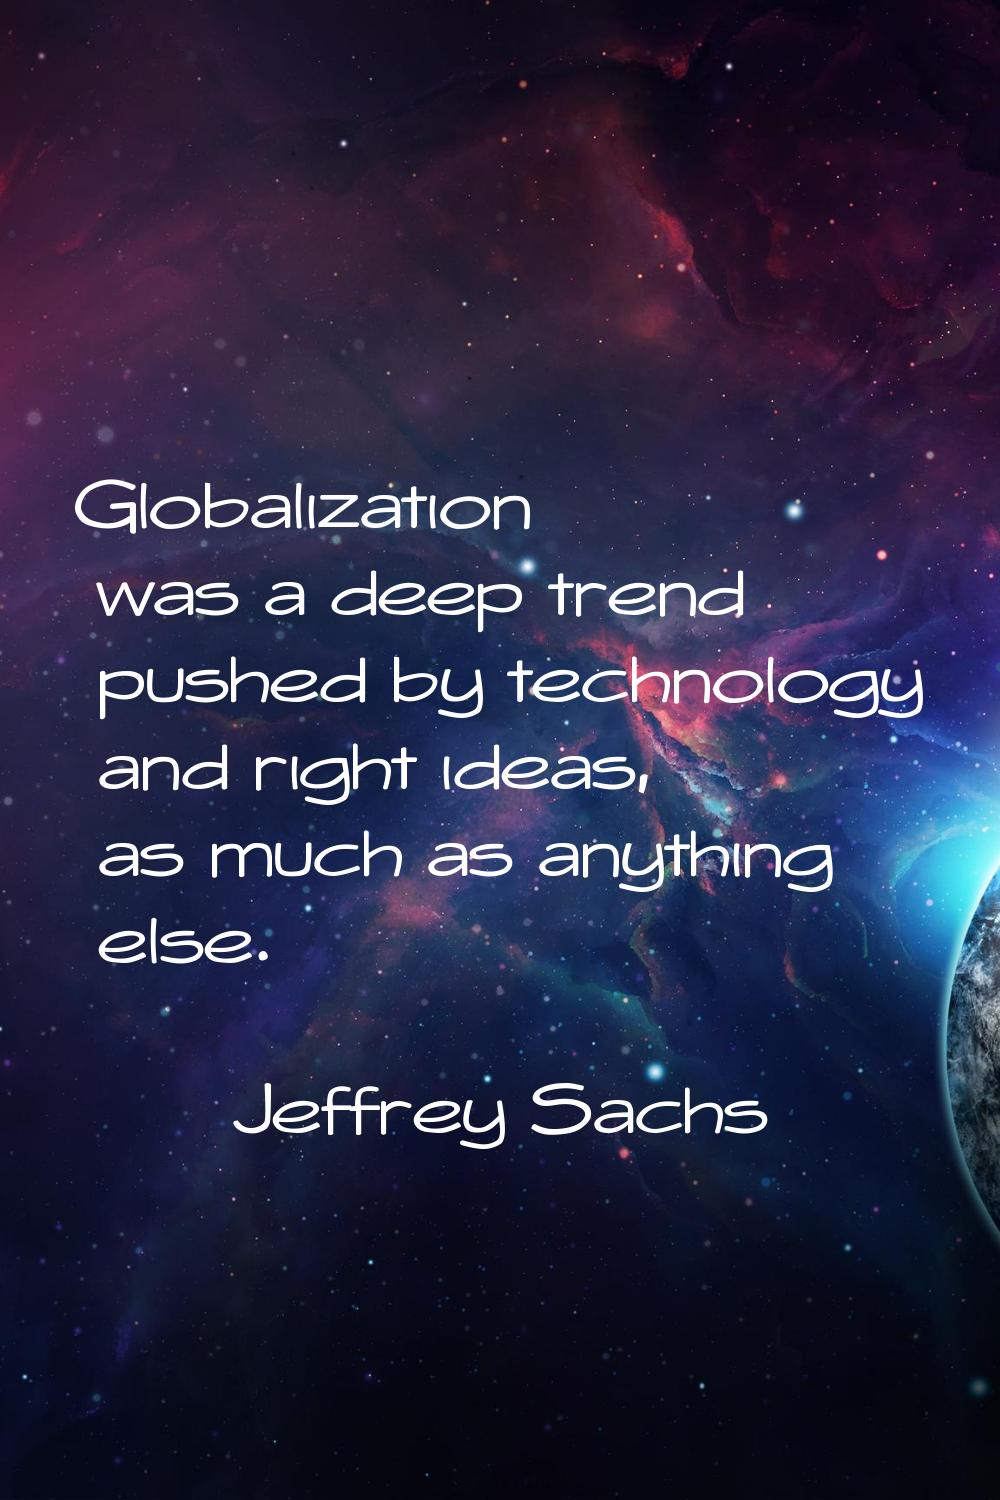 Globalization was a deep trend pushed by technology and right ideas, as much as anything else.